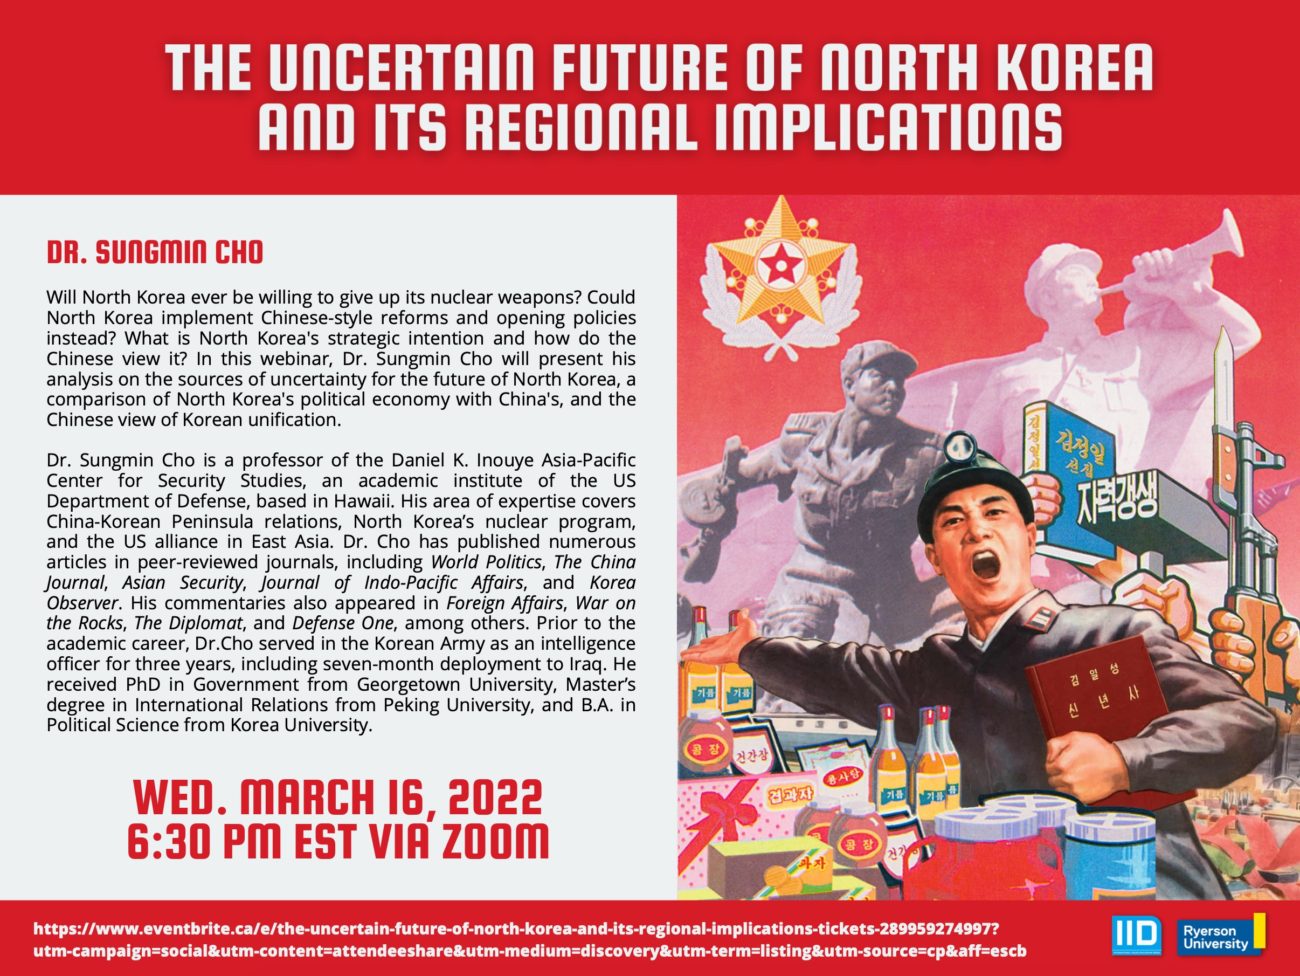 The Uncertain Future of North Korea and its Regional Implications